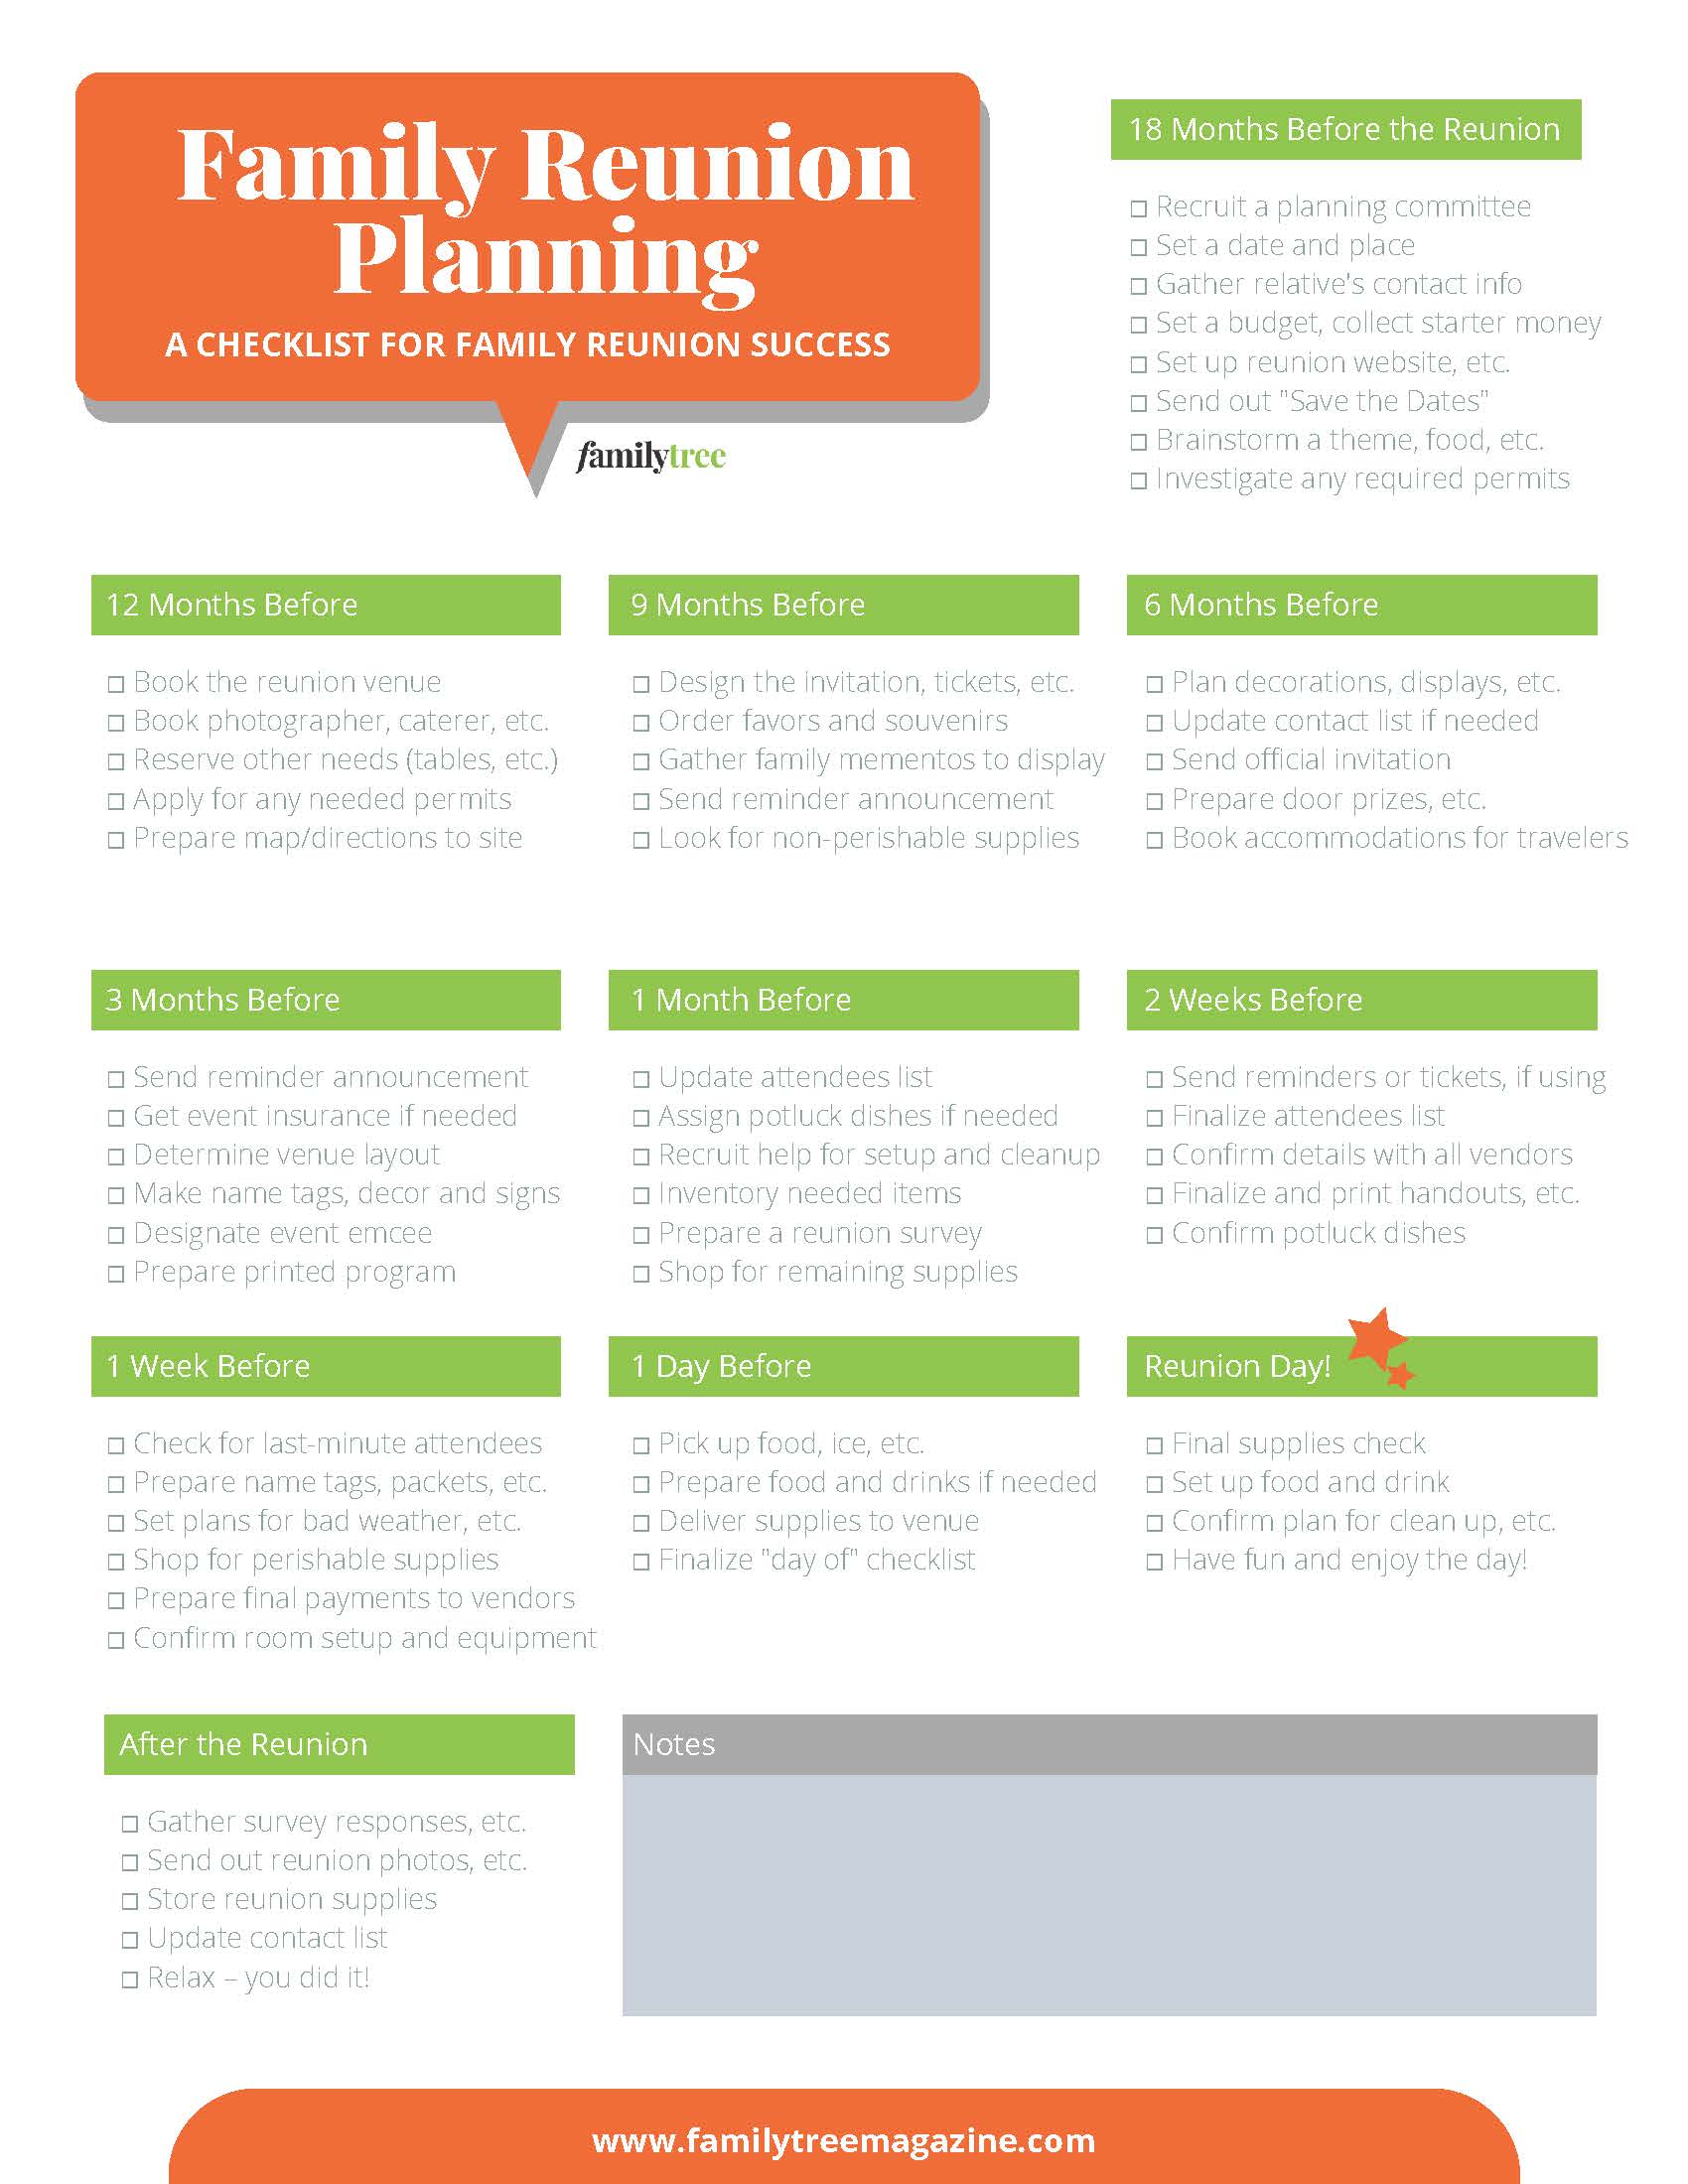 Your Family Reunion Planning Checklist